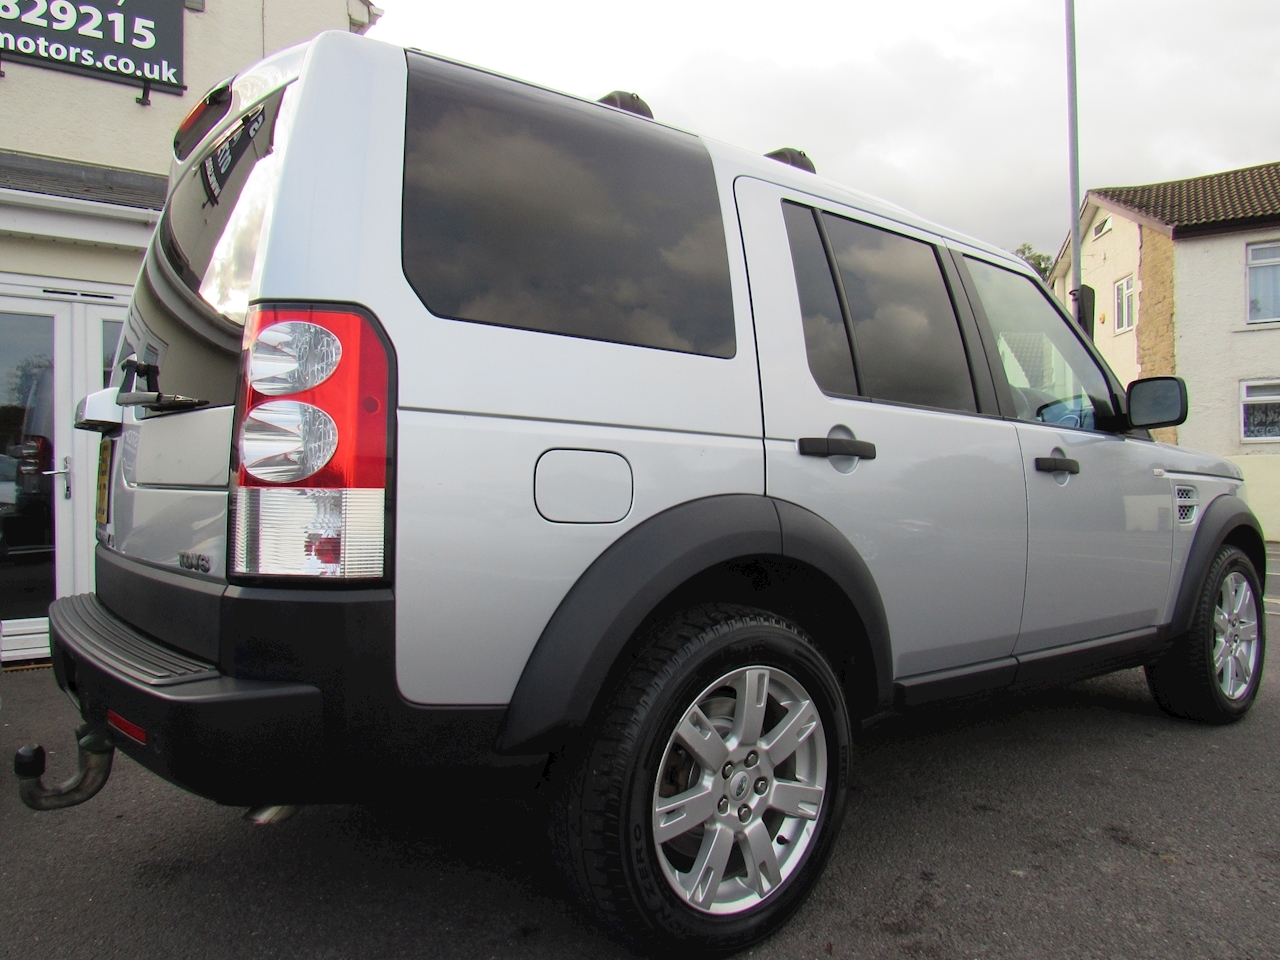 Discovery 4 3.0 TD V6 Panel Van 5dr Diesel Automatic (210 bhp) Panel Van 3.0 Automatic Diesel